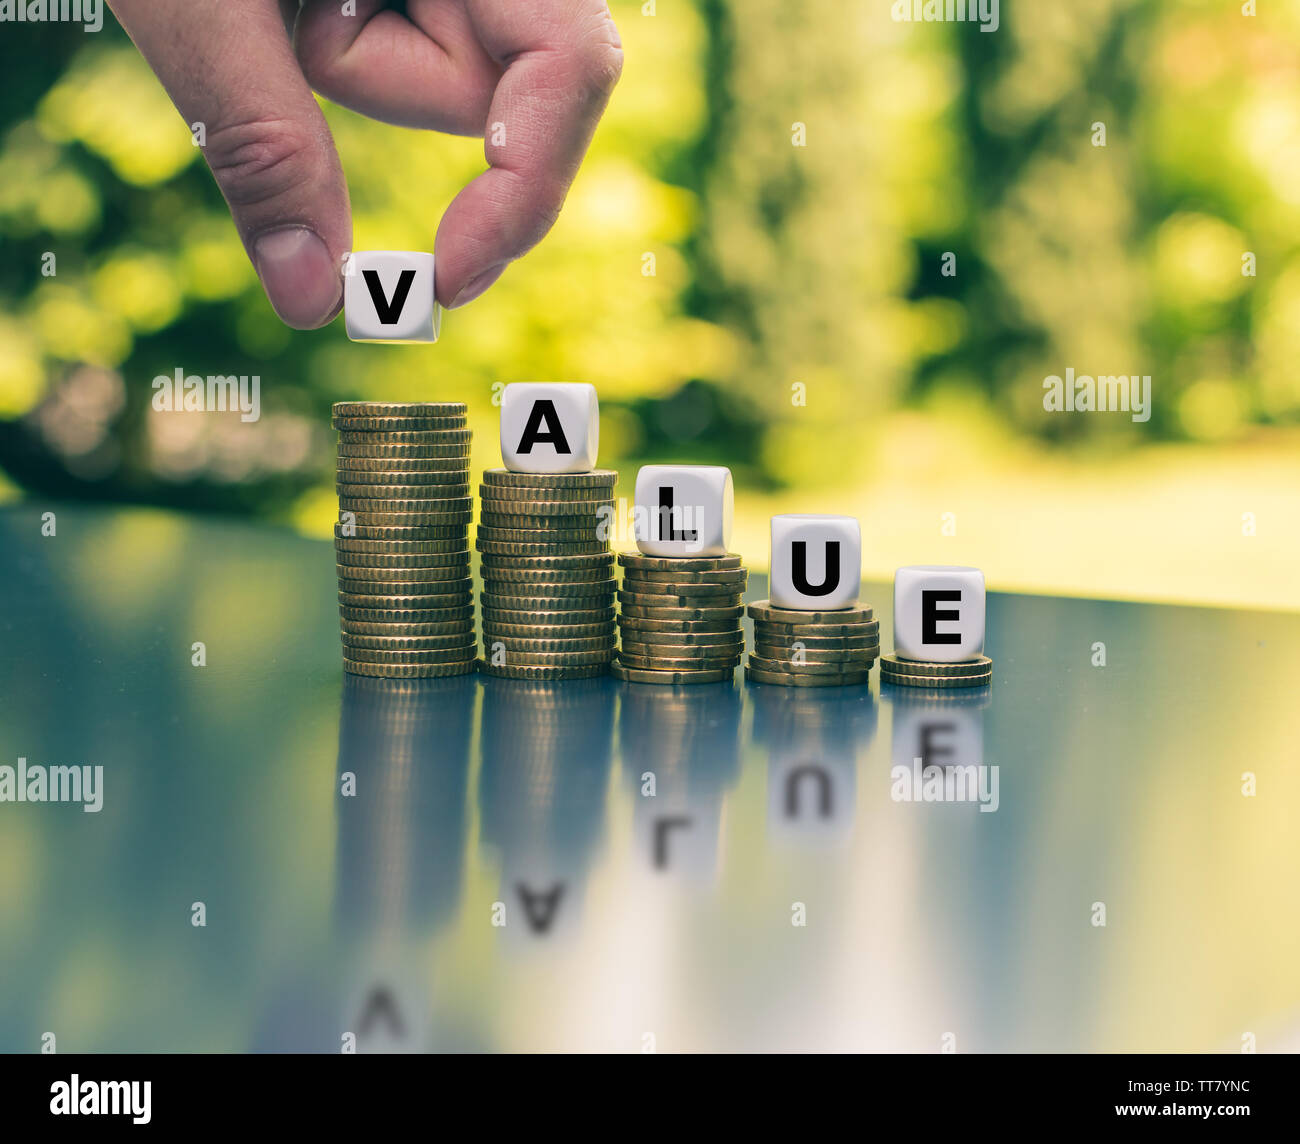 Symbol for decreasing value. Dice form the word 'value' on decreasing stacks of coins. Stock Photo